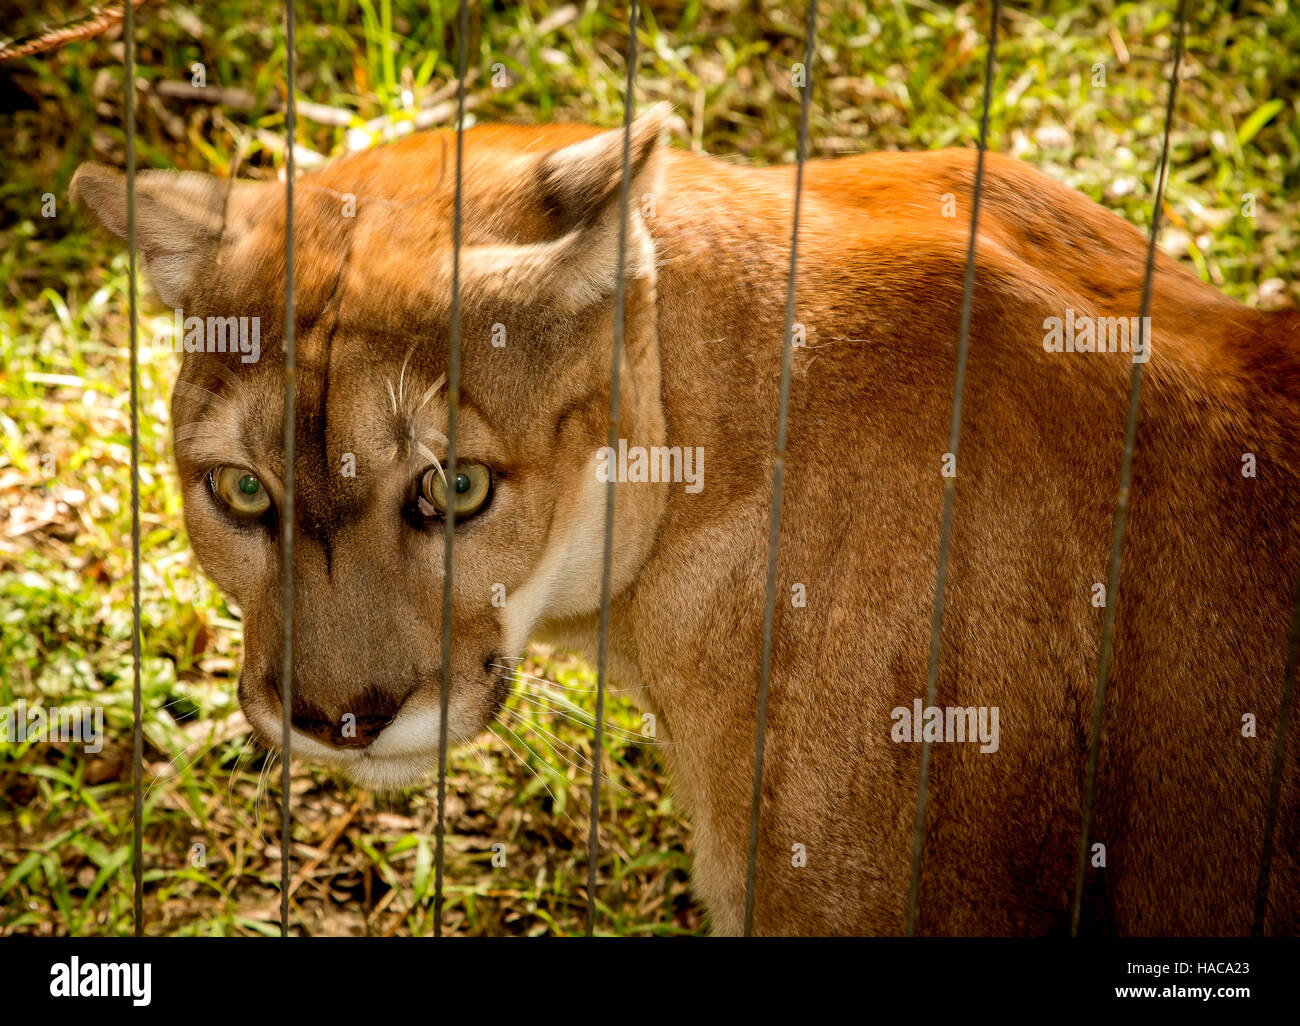 A caged panther looking at the photographer. Stock Photo